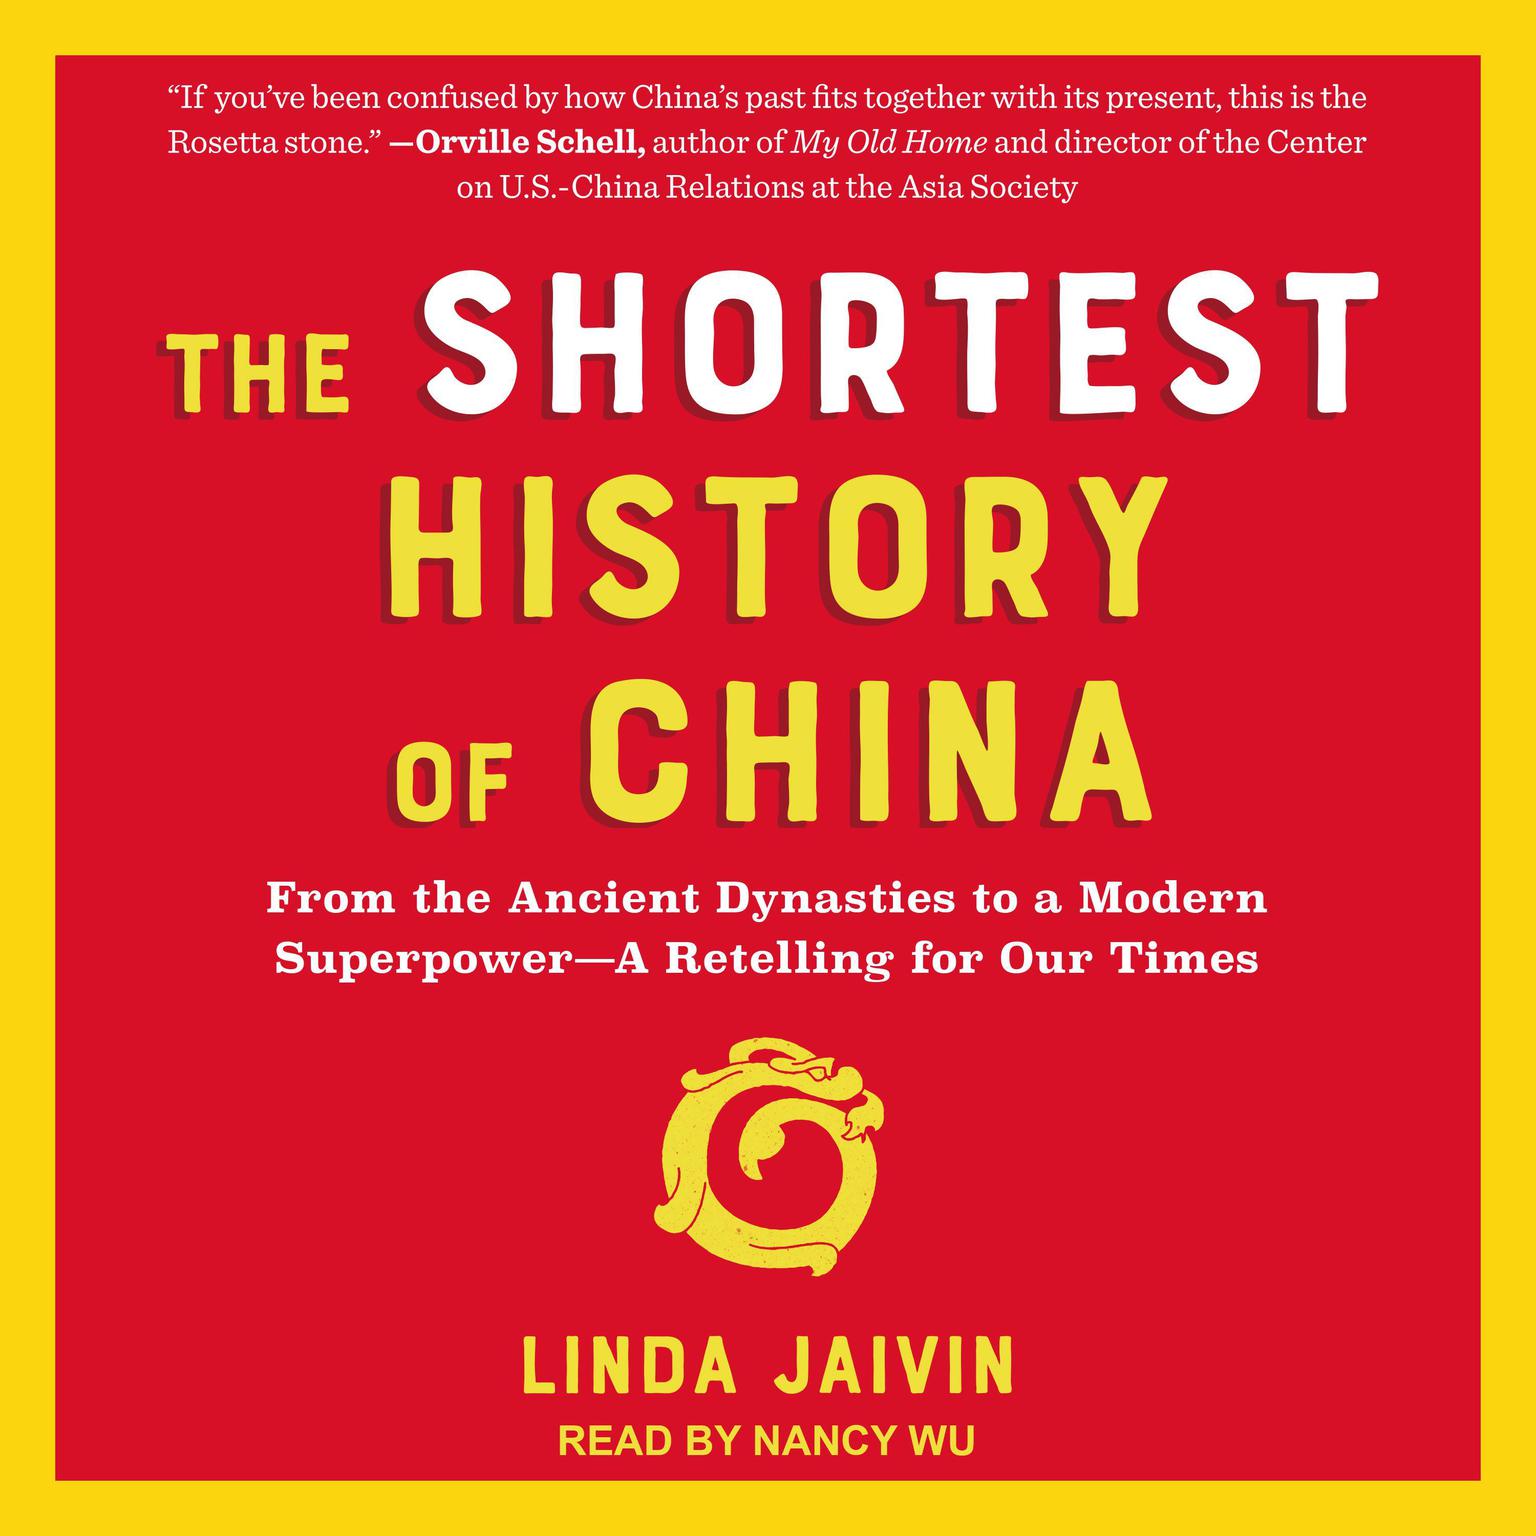 The Shortest History of China: From the Ancient Dynasties to a Modern Superpower - A Retelling for Our Times Audiobook, by Linda Jaivin